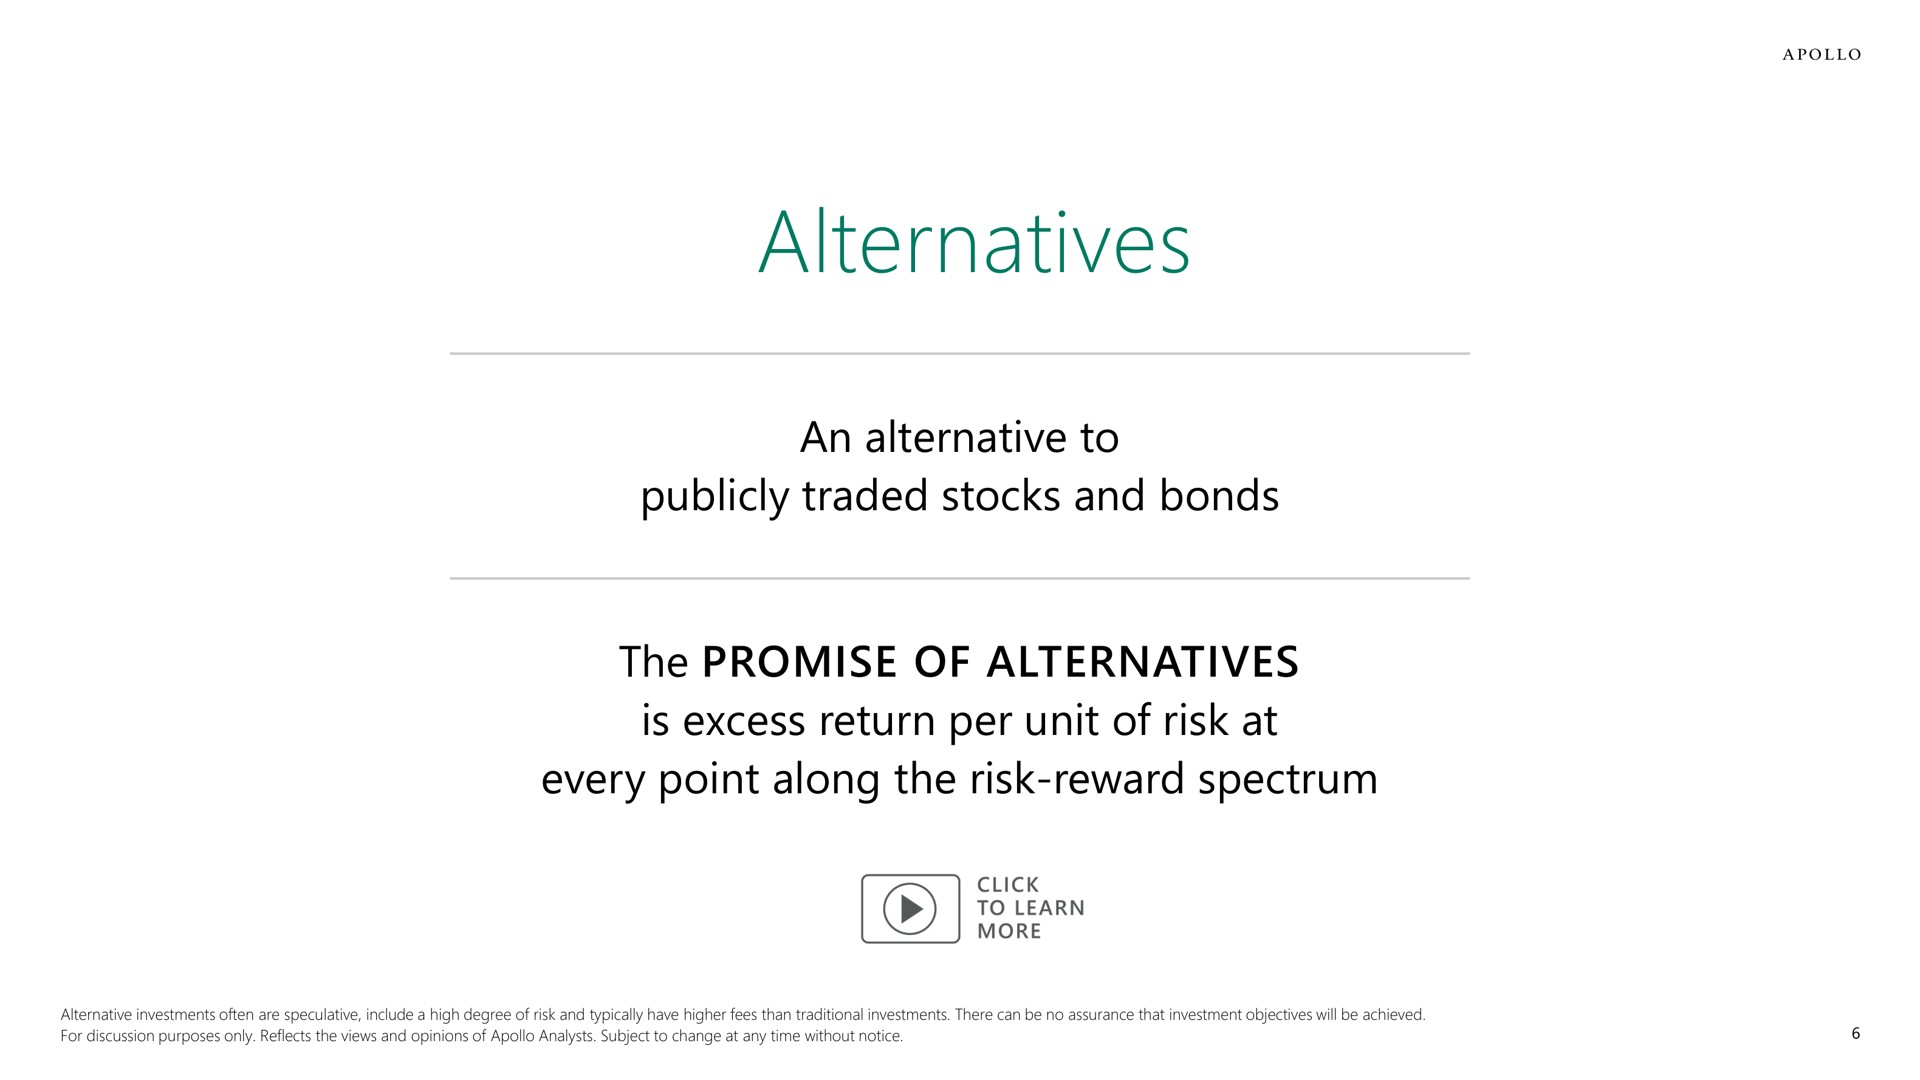 alternatives an alternative to publicly traded stocks and bonds the promise of alternatives is excess return per unit of risk at every point along the risk reward spectrum | Apollo Global Management